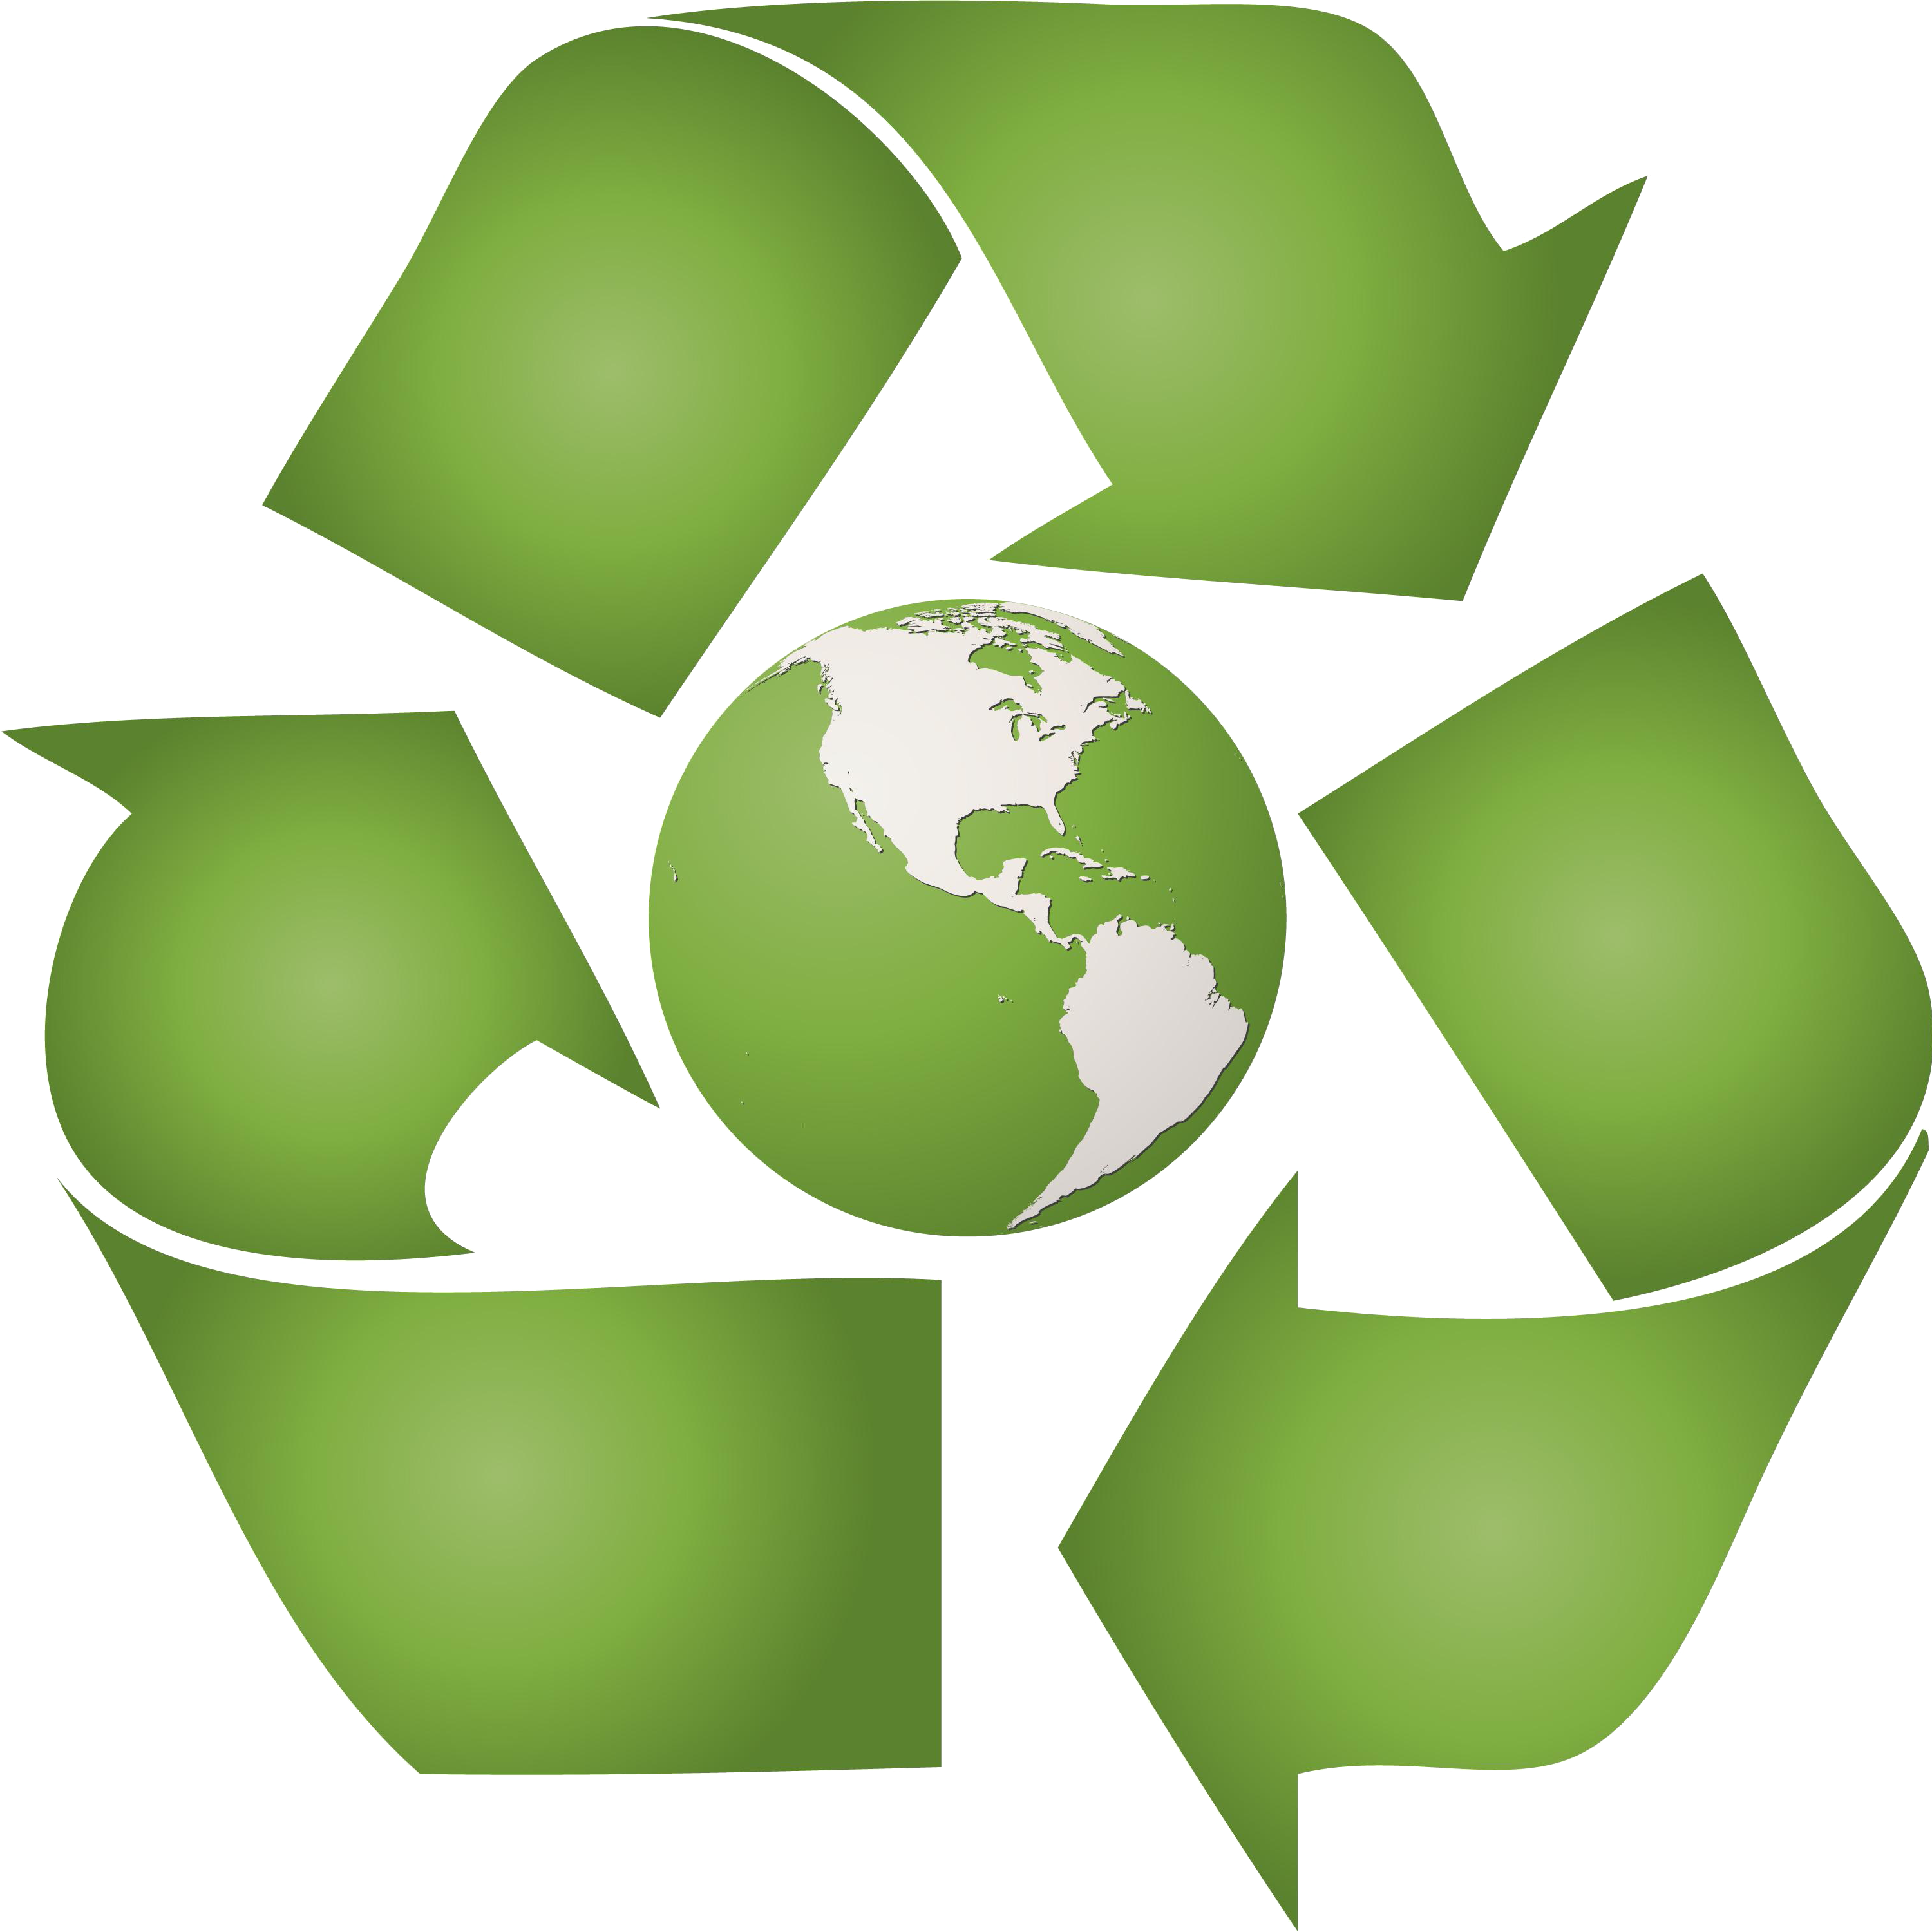 Green Energy HQ Image Free PNG PNG Image